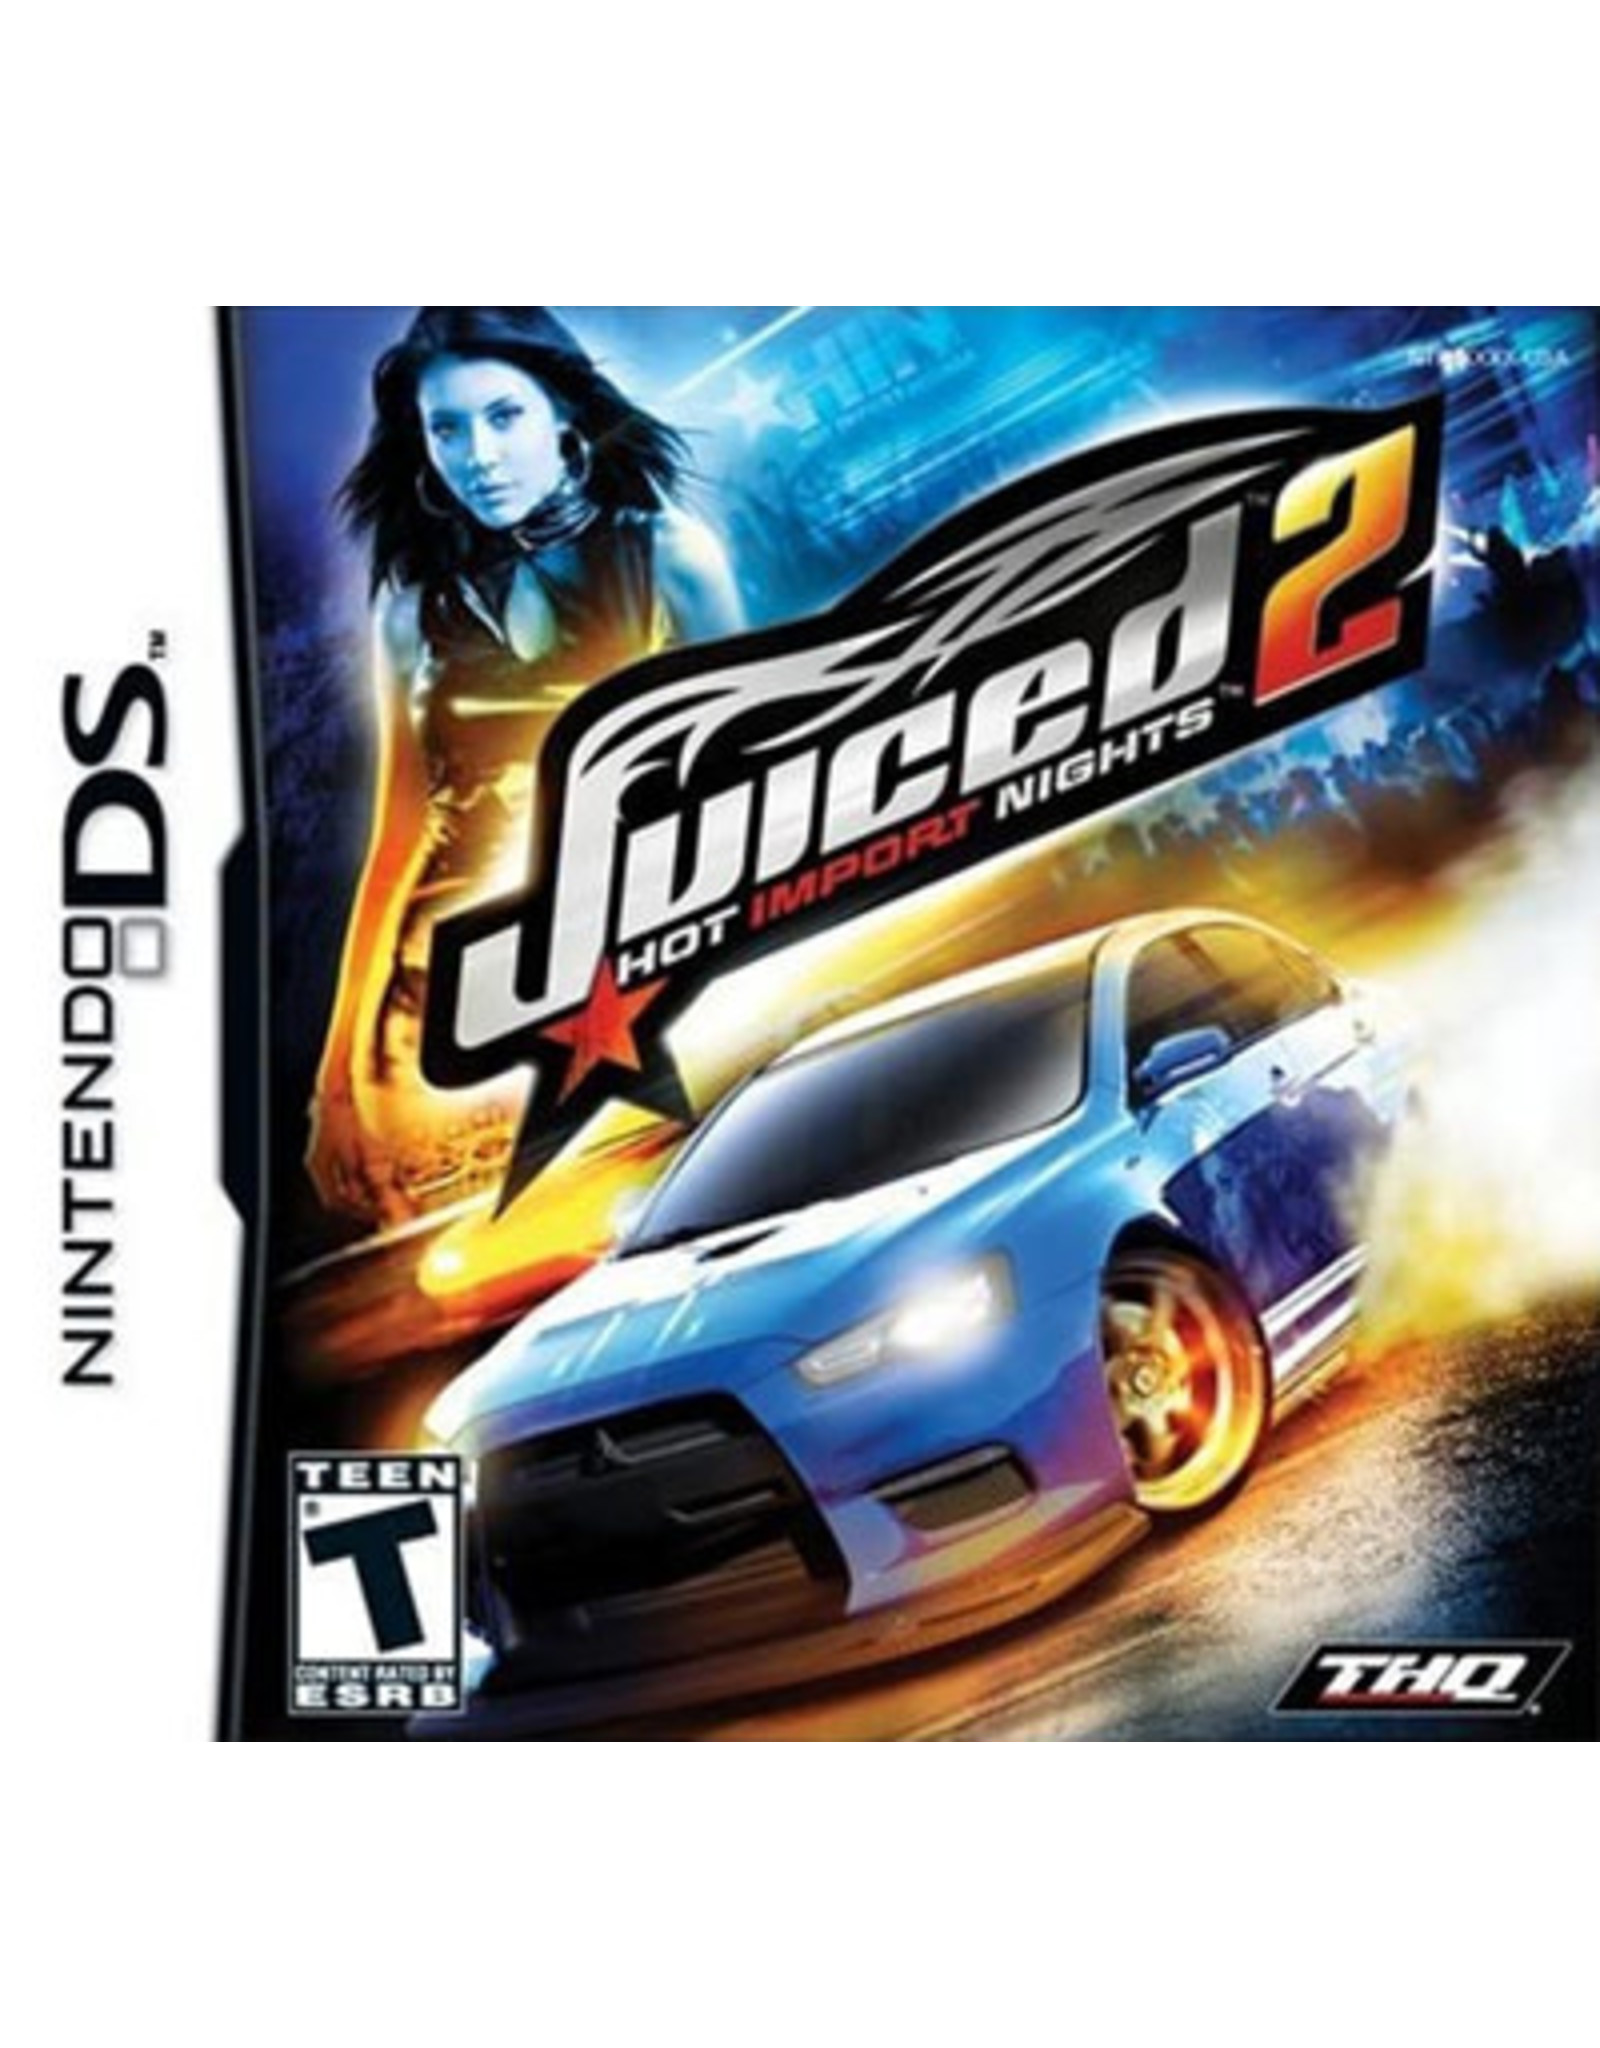 Nintendo DS Juiced 2 Hot Import Nights (Cart Only)